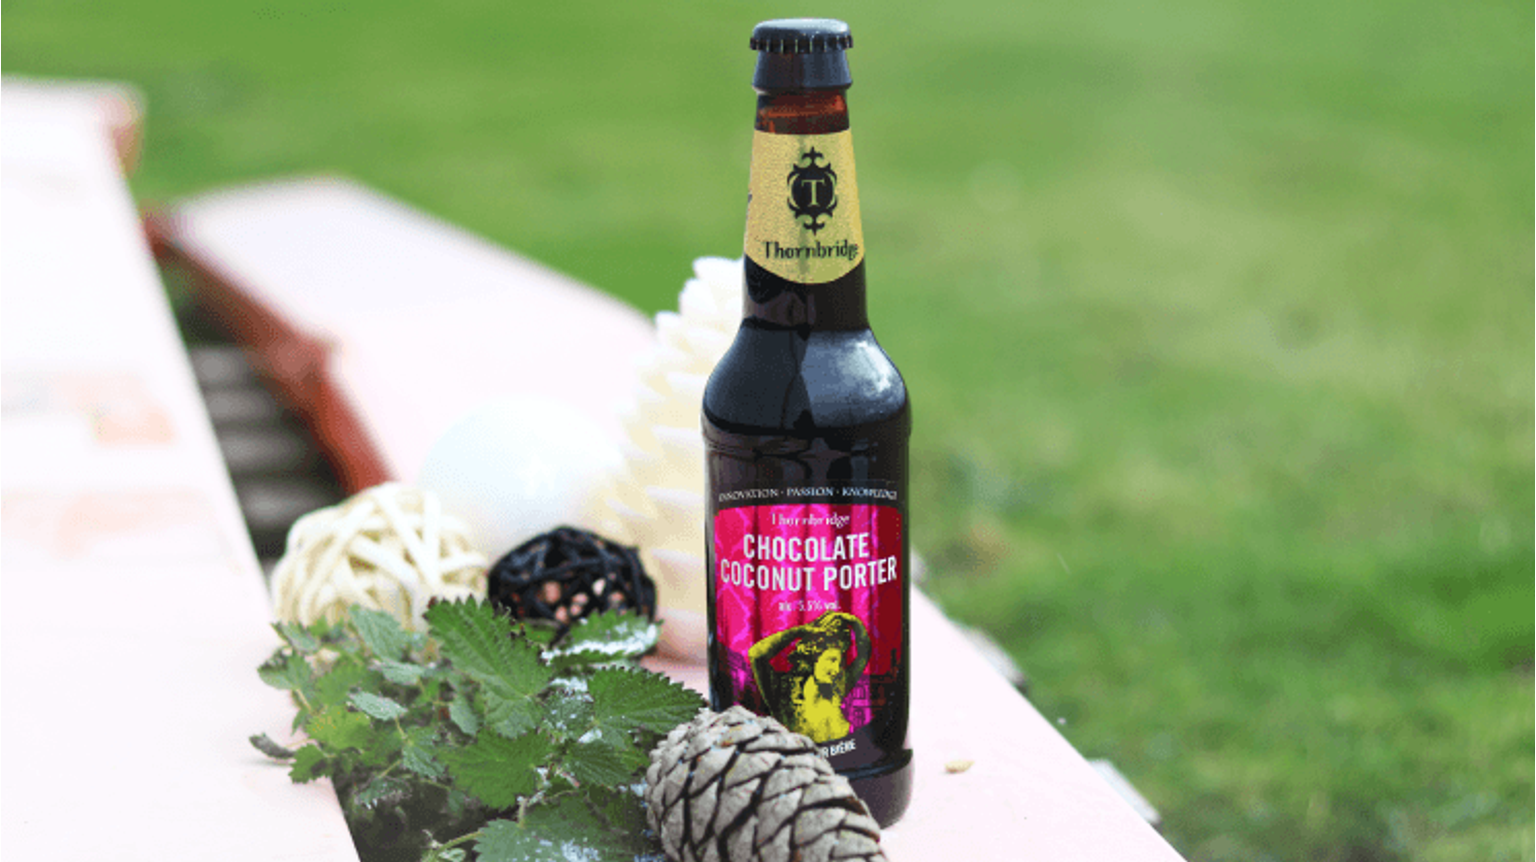 thumbnail for blog article named: Beery Christmas Day 19: Thornbridge Coconut Chocolate Porter